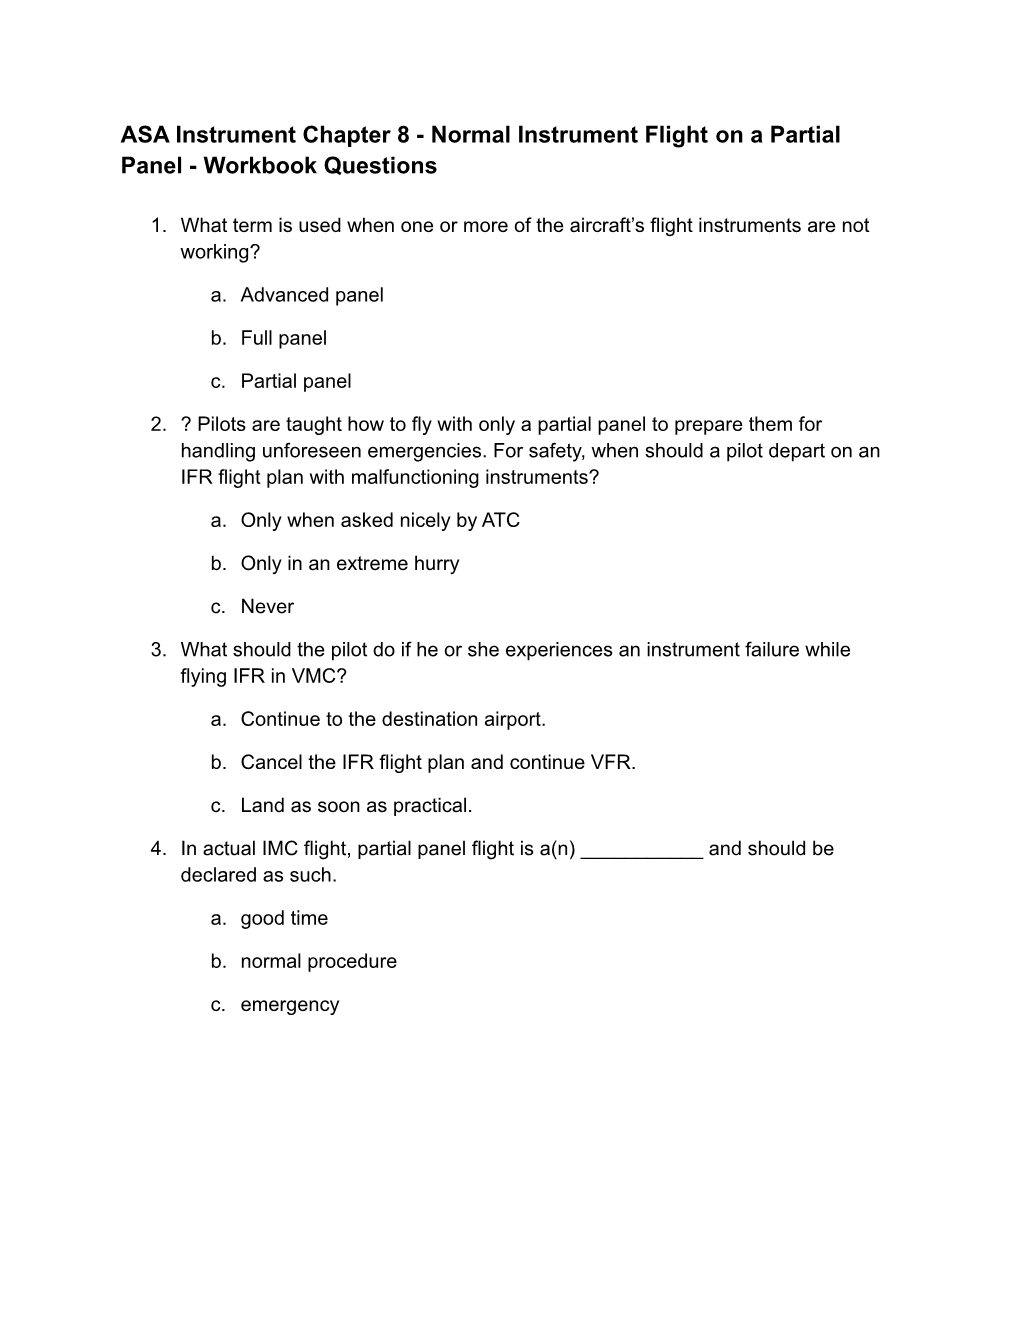 Normal Instrument Flight on a Partial Panel - Workbook Questions